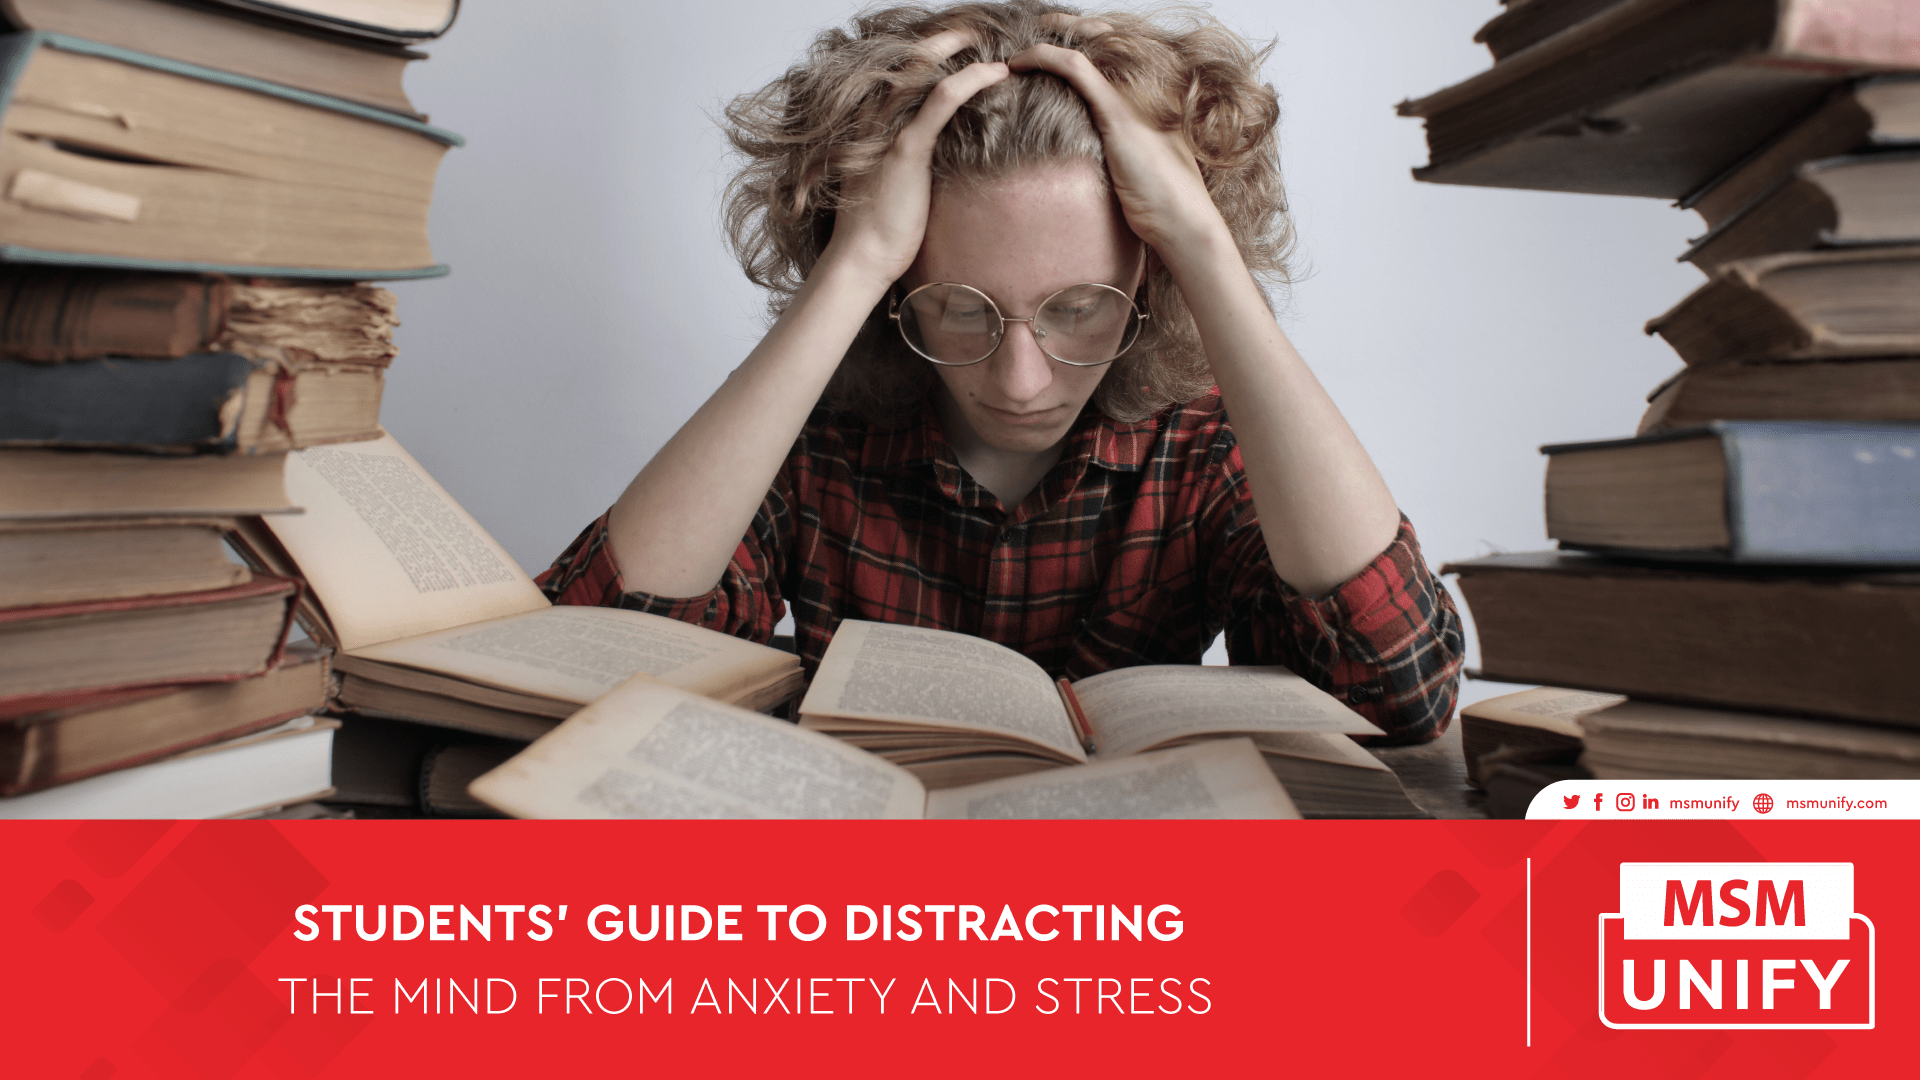 MSM Unify STUDENTS GUIDE TO DISTRACTING THE MIND FROM ANXIETY AND STRESS